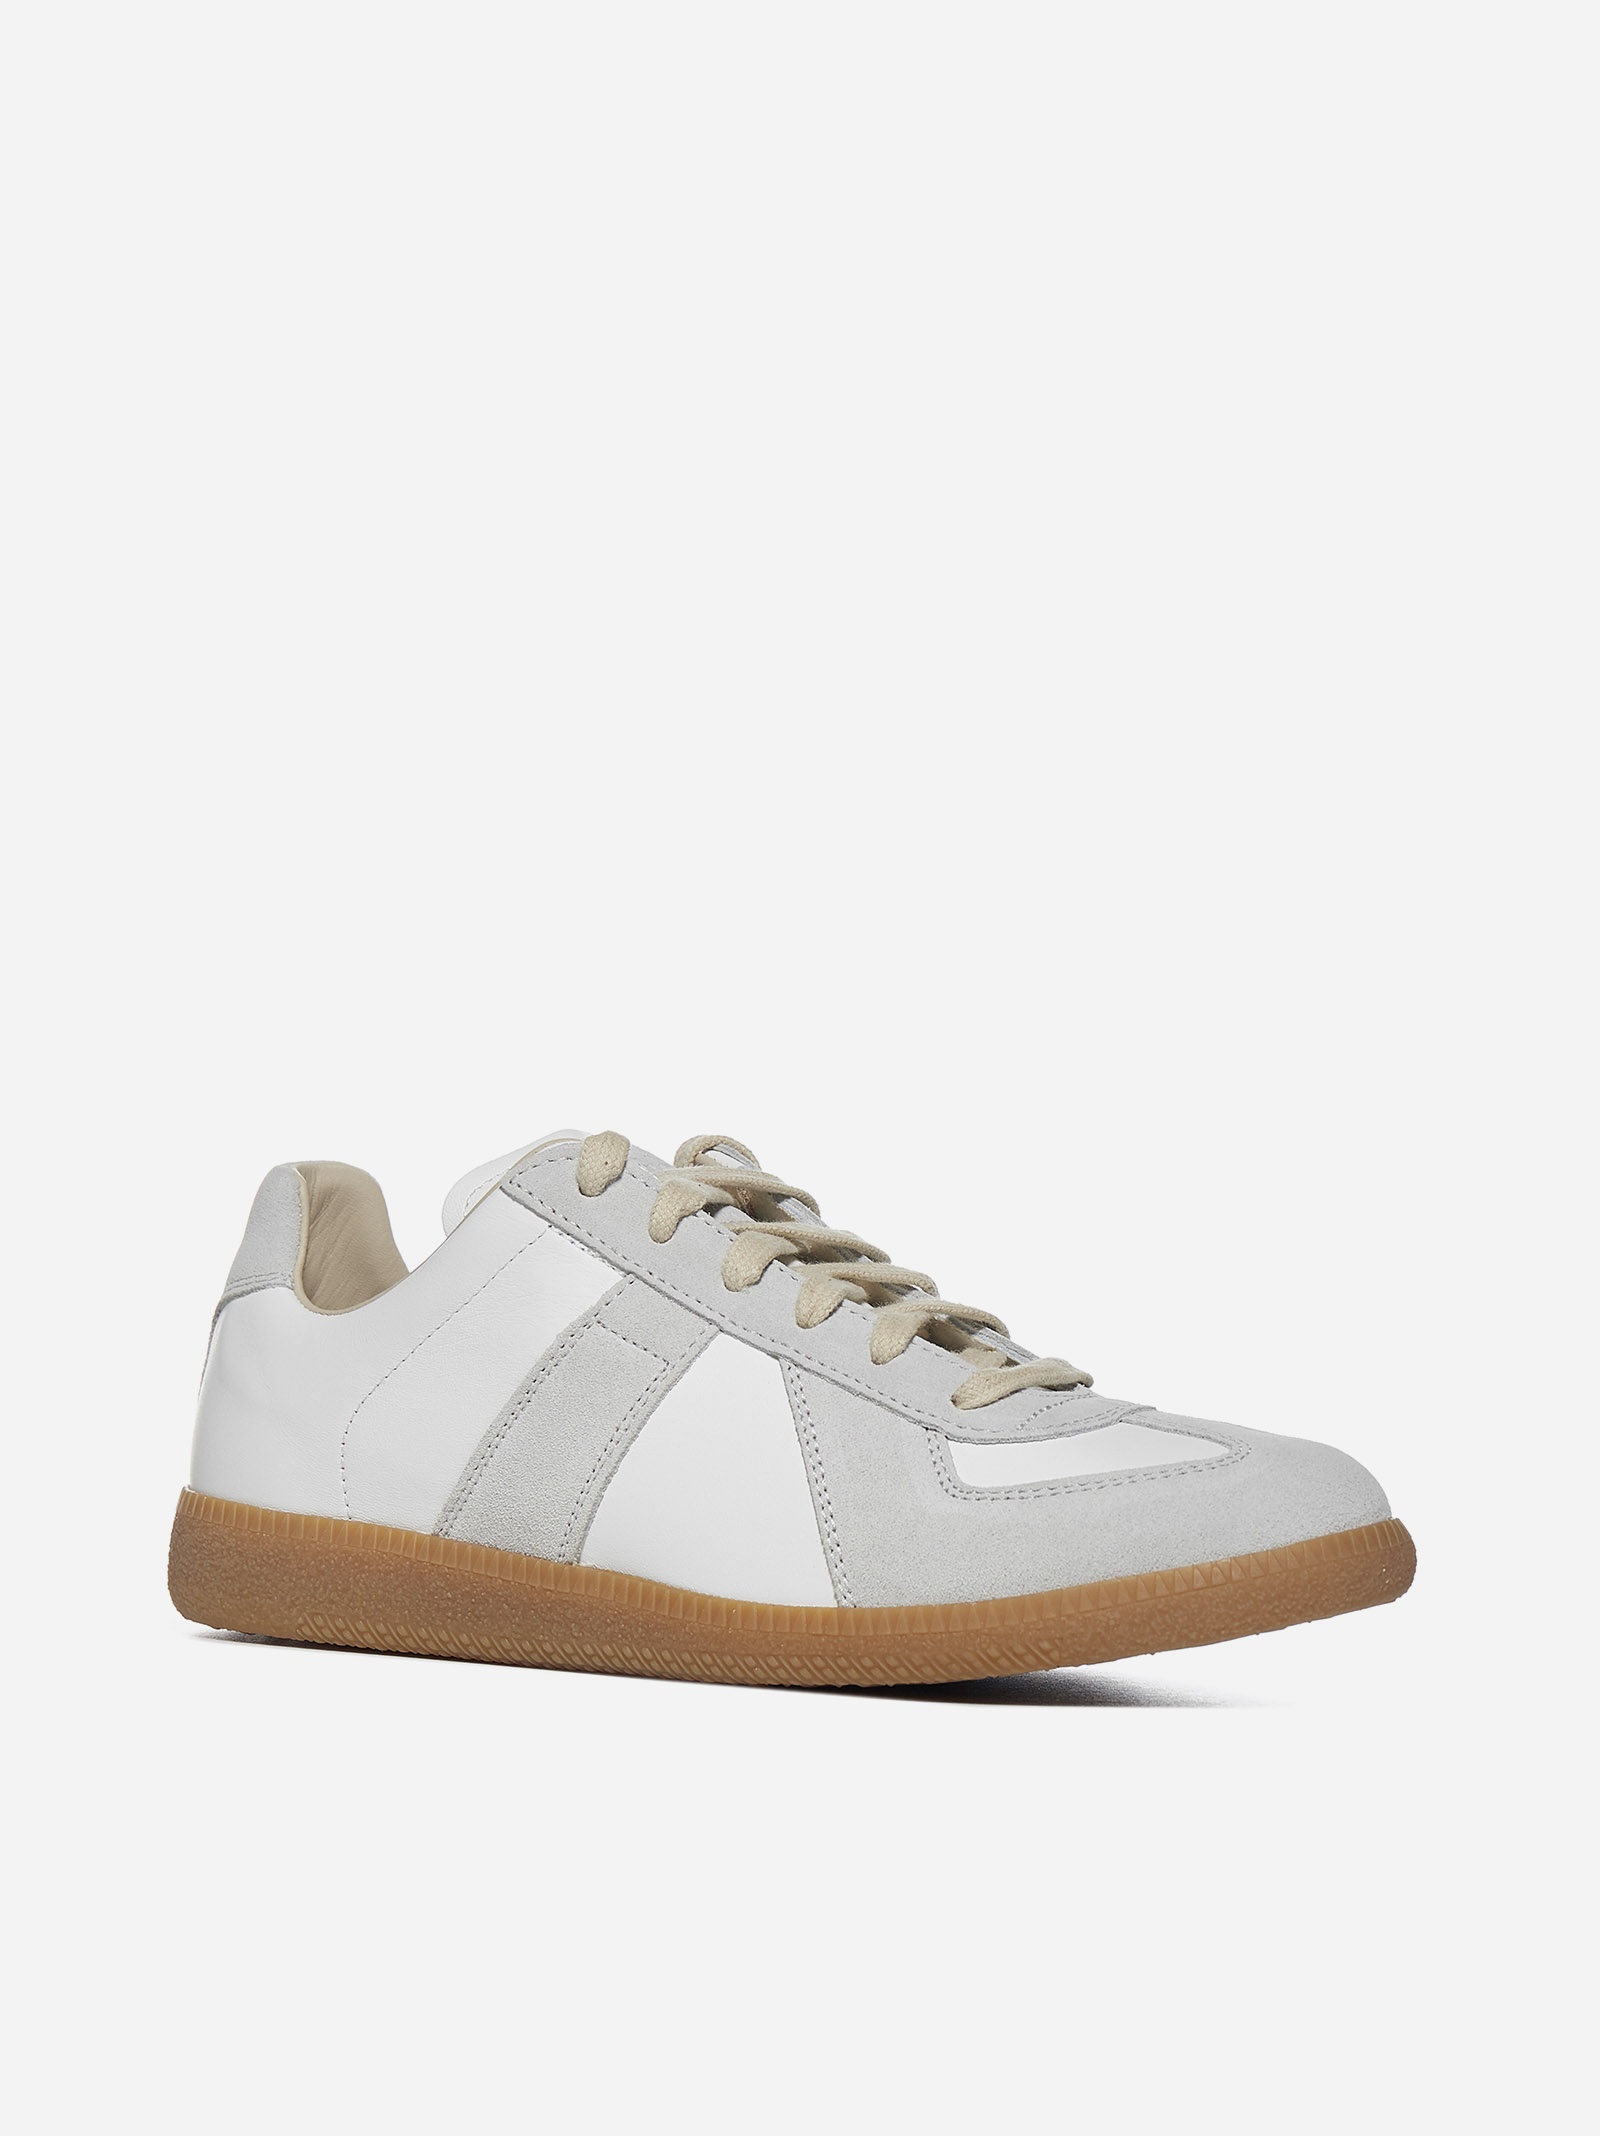 Replica leather and suede sneakers - 2